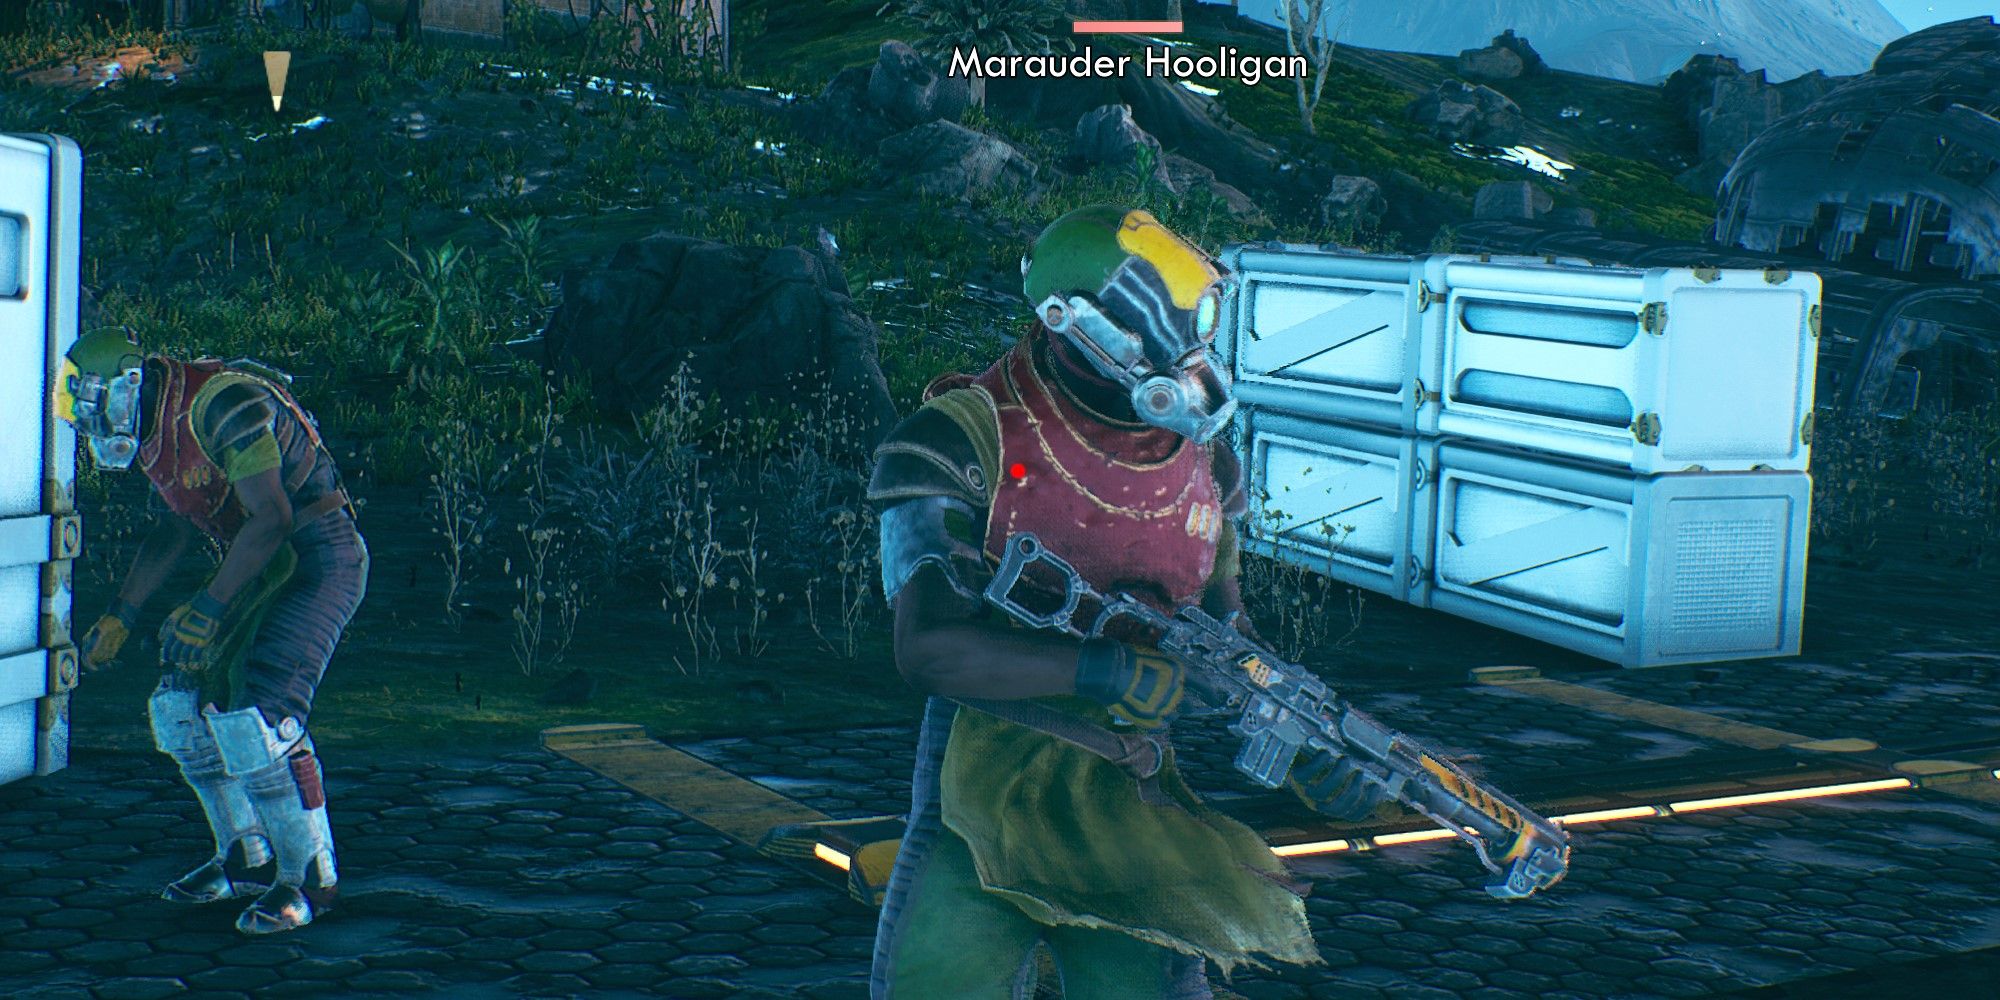 The Outer Worlds Marauder Hooligan looking for player in Emerald Vale Region